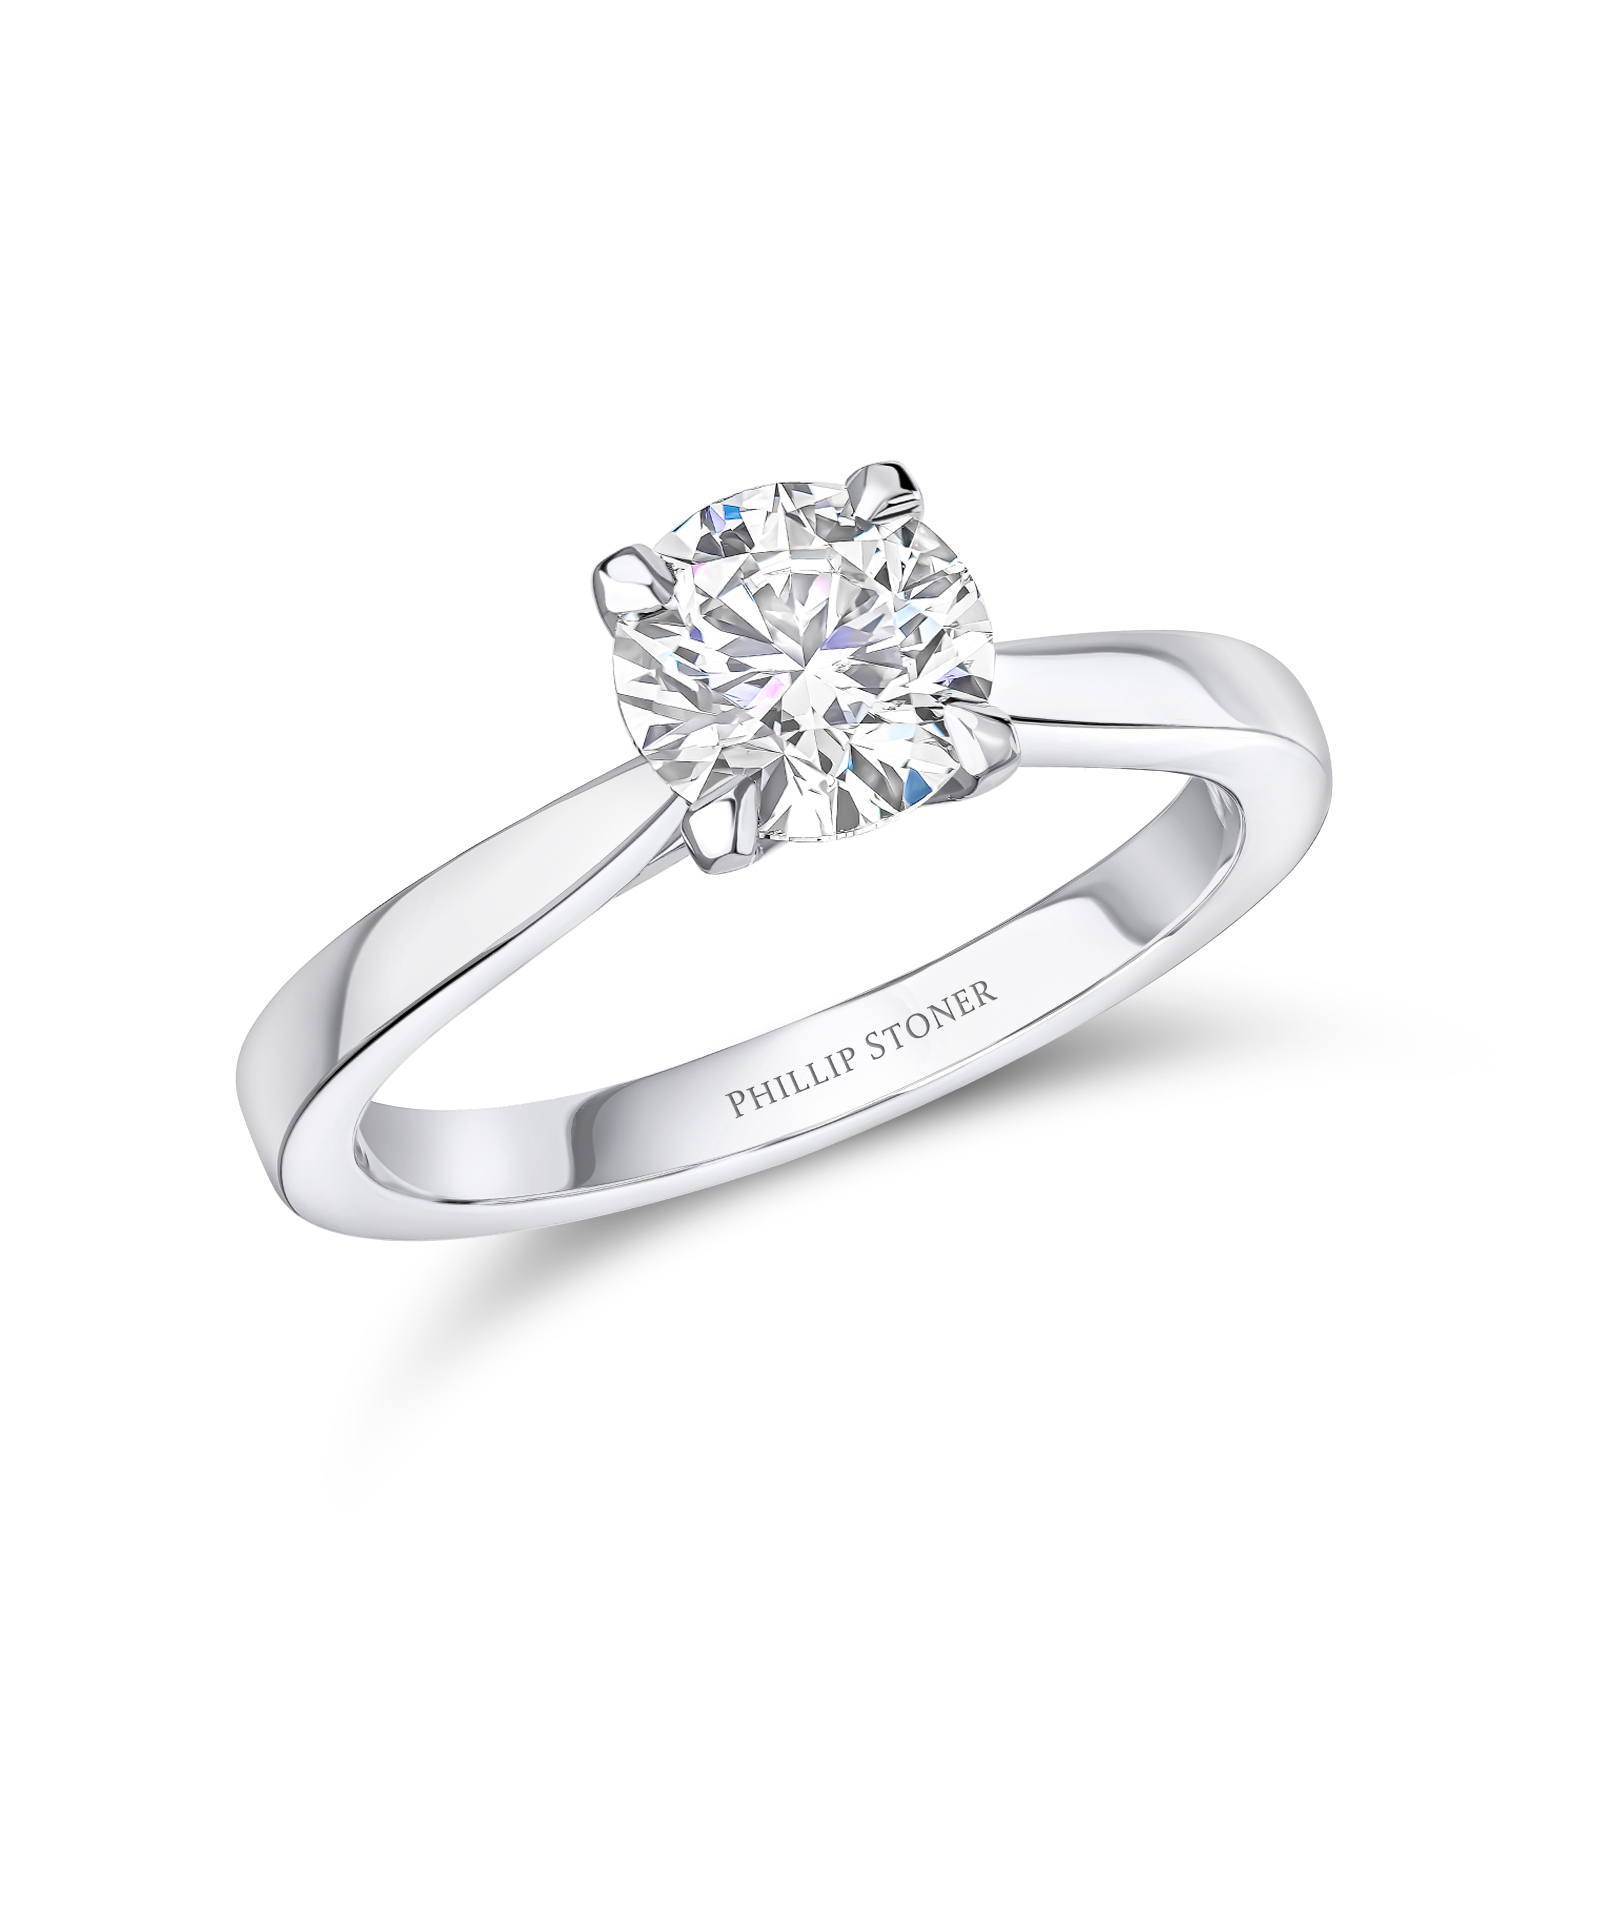 1.5ct Round Brilliant Cut Diamond Ring with Cathedral Setting - Phillip Stoner The Jeweller